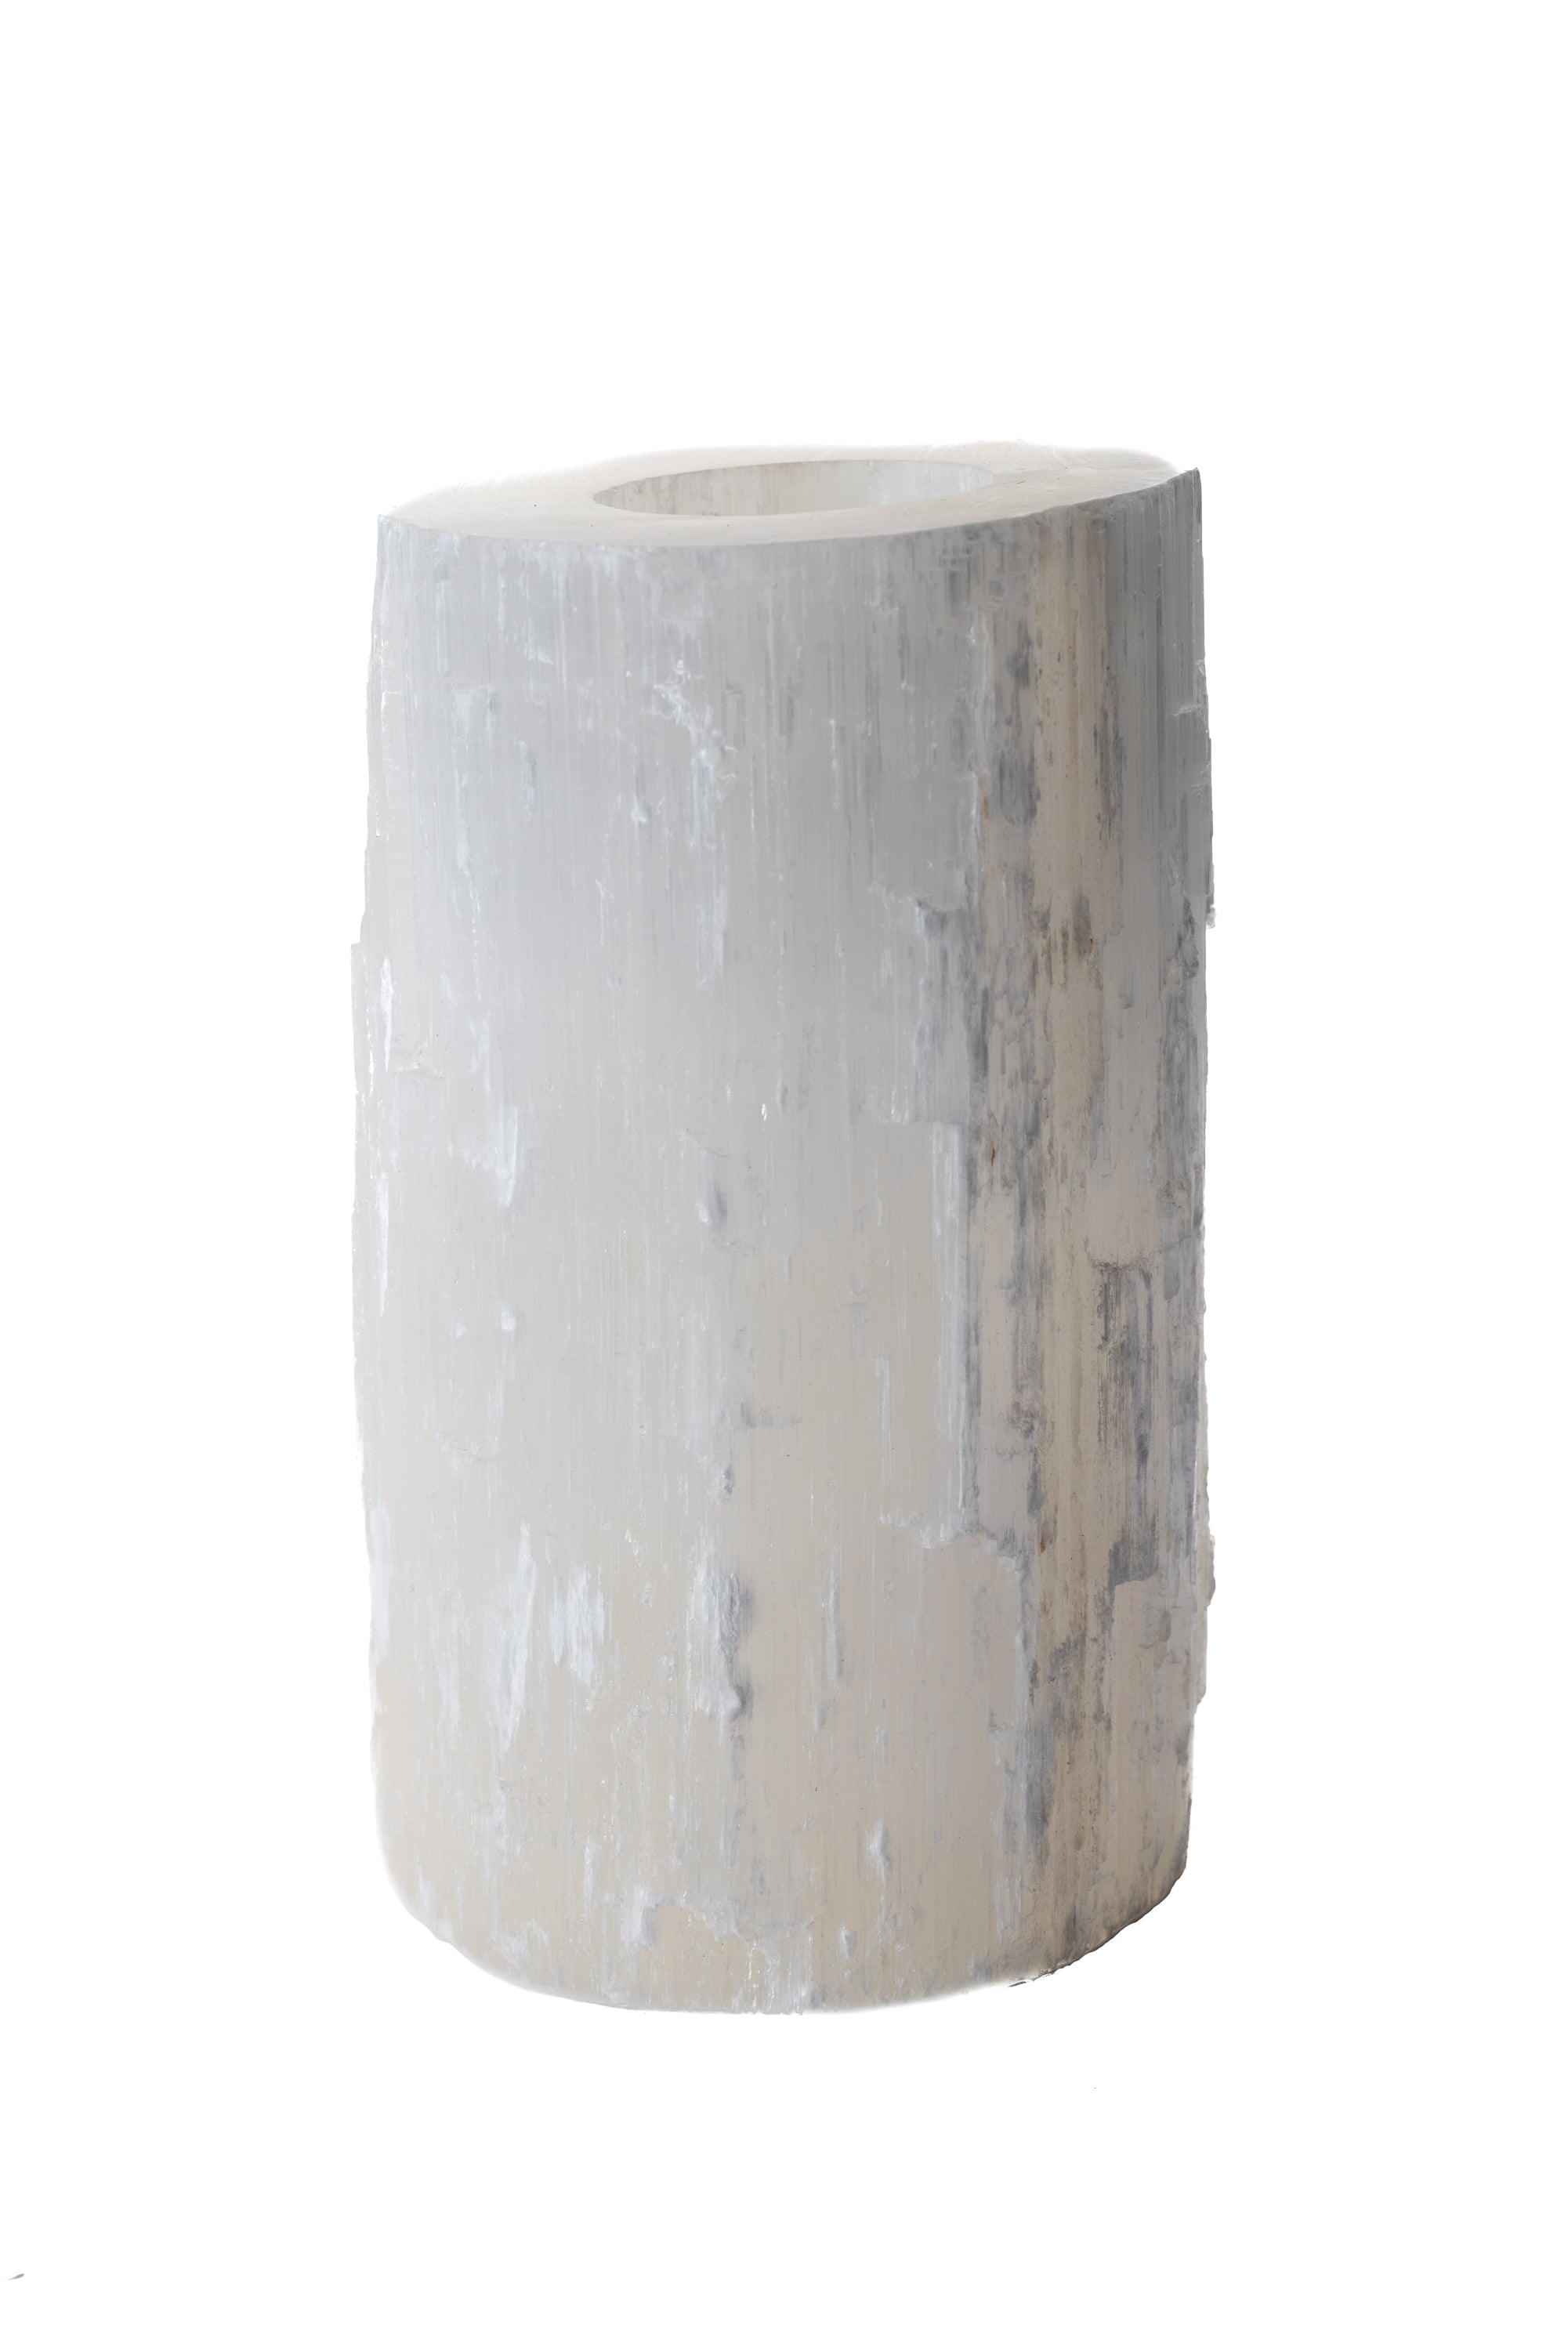 Selenite Tealight Candle Holders for Hire | Gold Coast Wedding & Event Hire